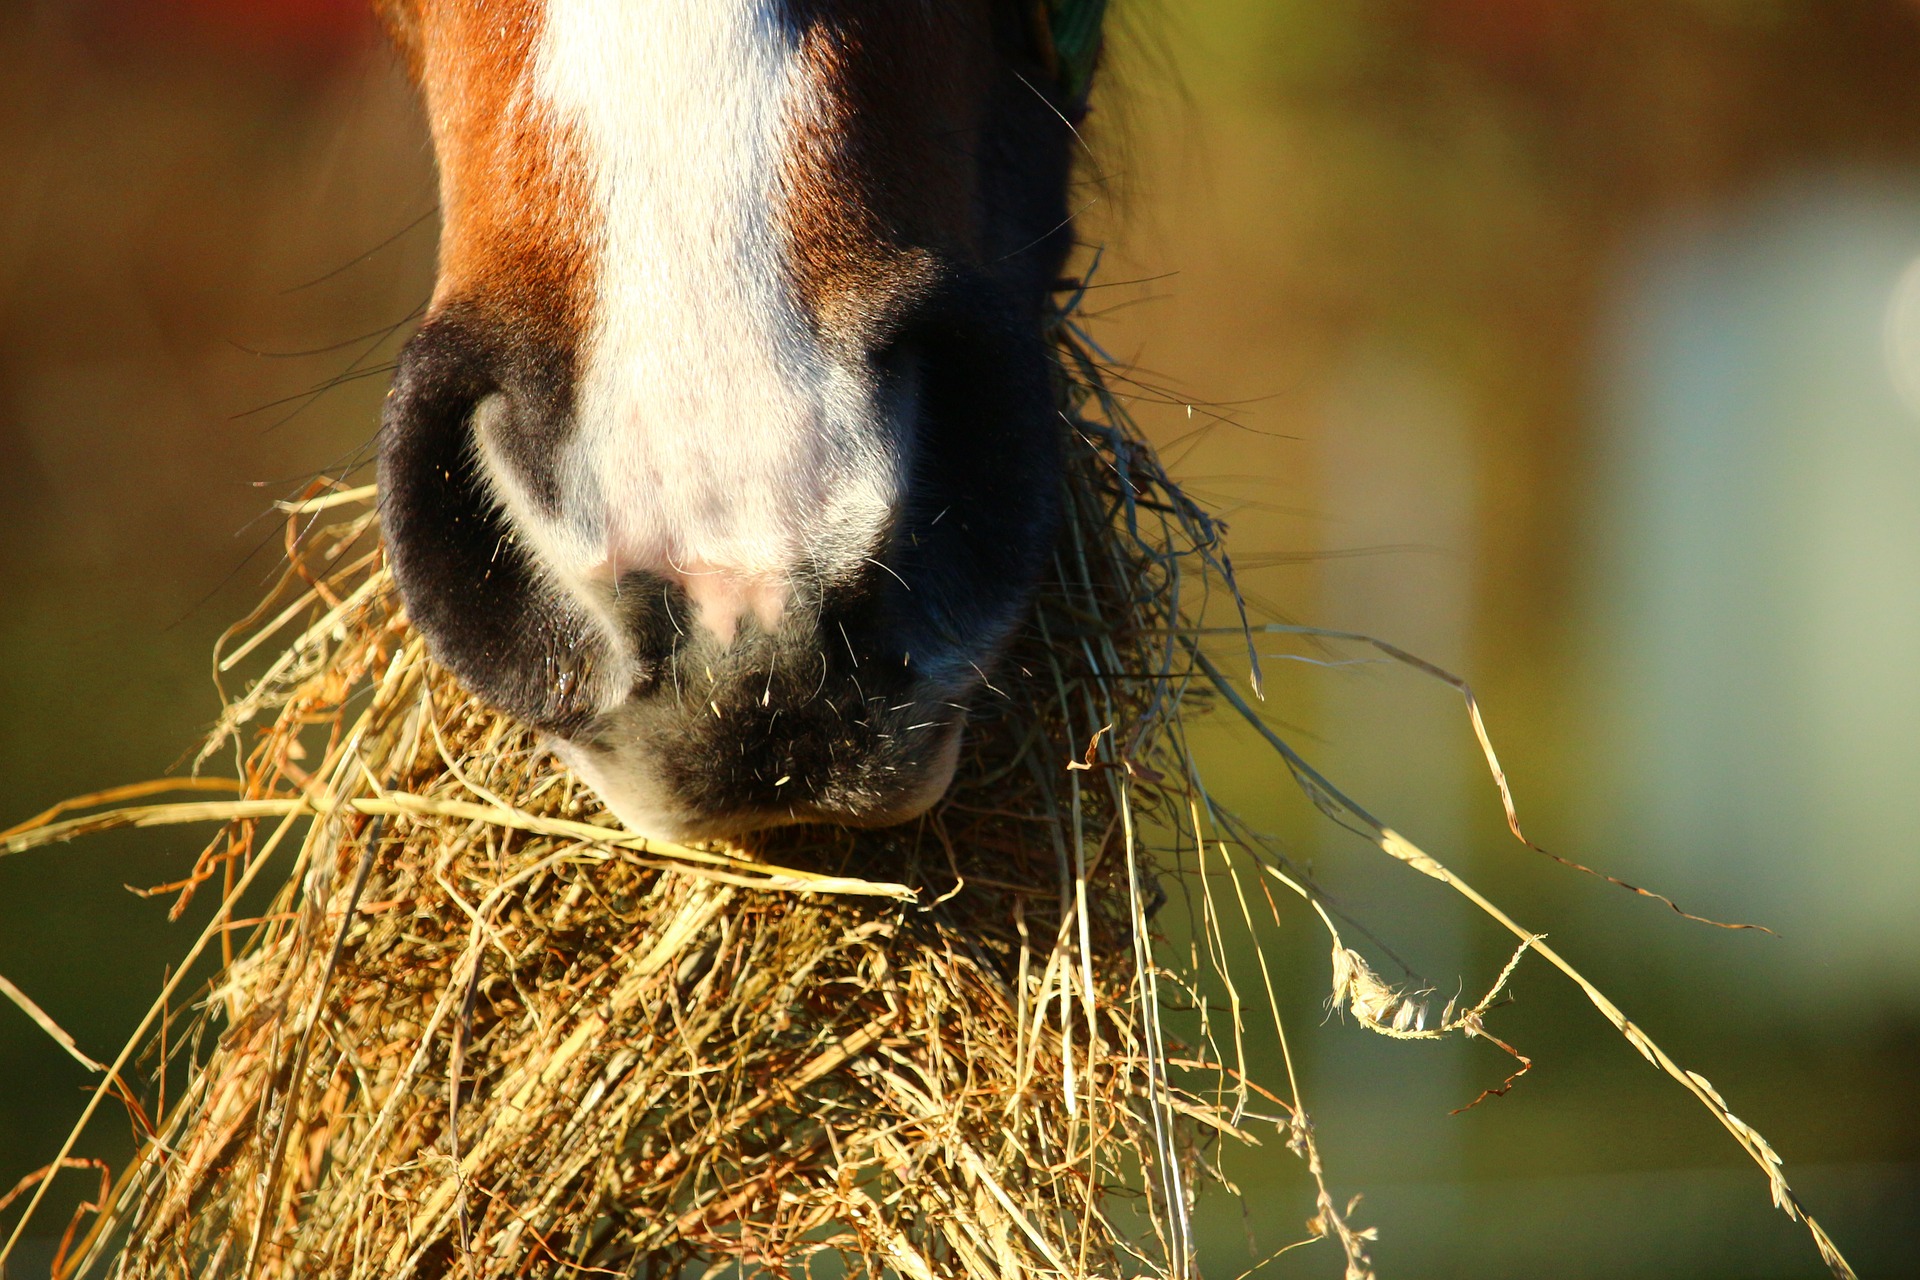 Are you feeding your horse enough hay?